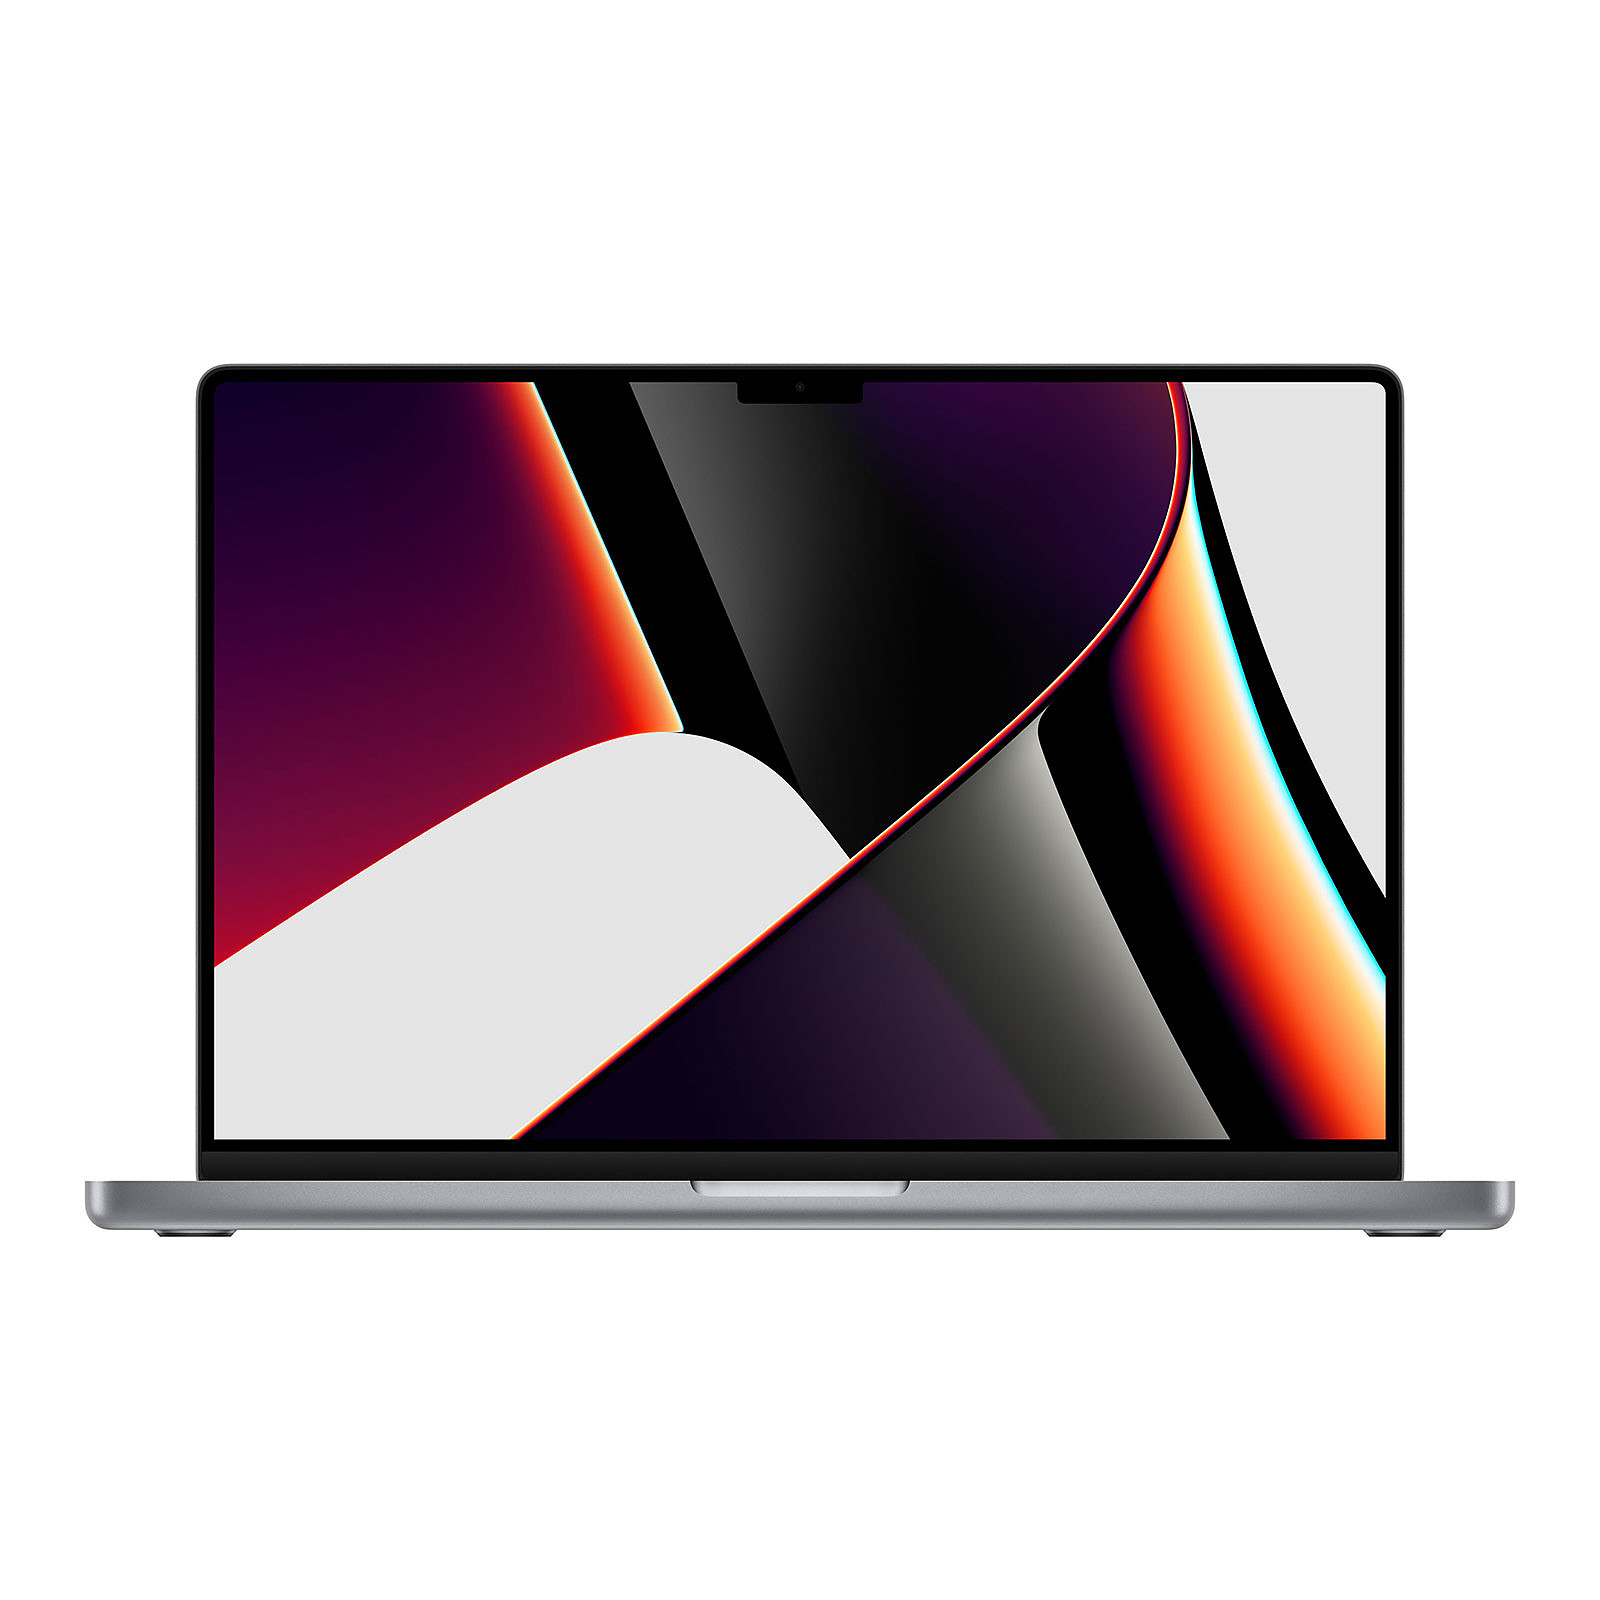 Apple MacBook Pro M1 Pro (2021) 16" Gris sideral 32Go/2To (MK183FN/A-32GB-2TB) - MacBook Apple